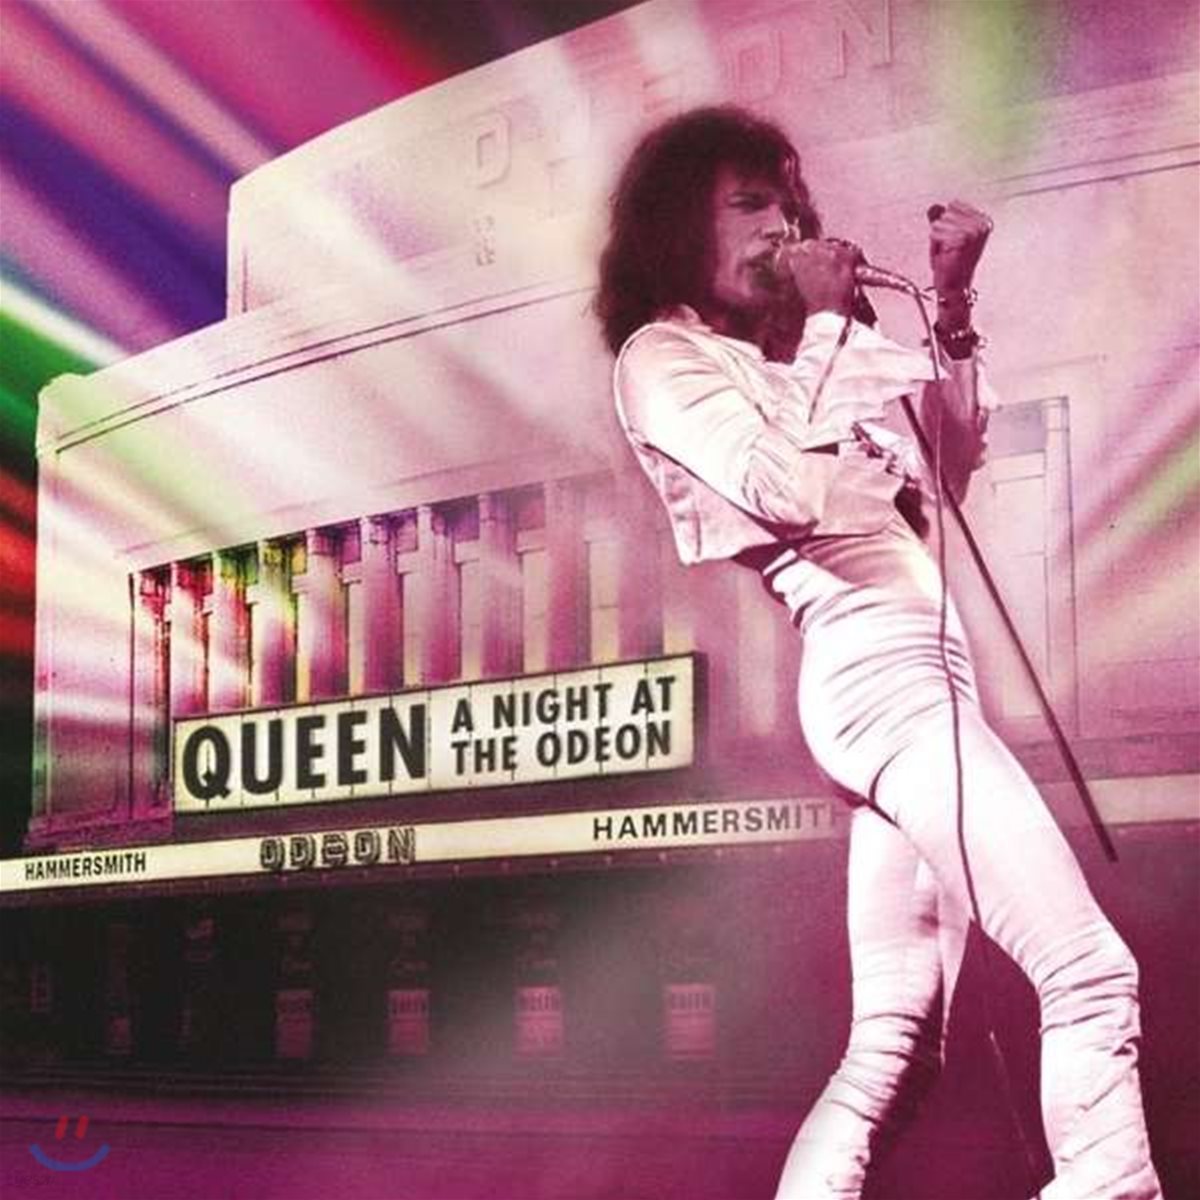 Queen - A Night At The Odeon Hammersmith 1975 해머스미스 공연 라이브